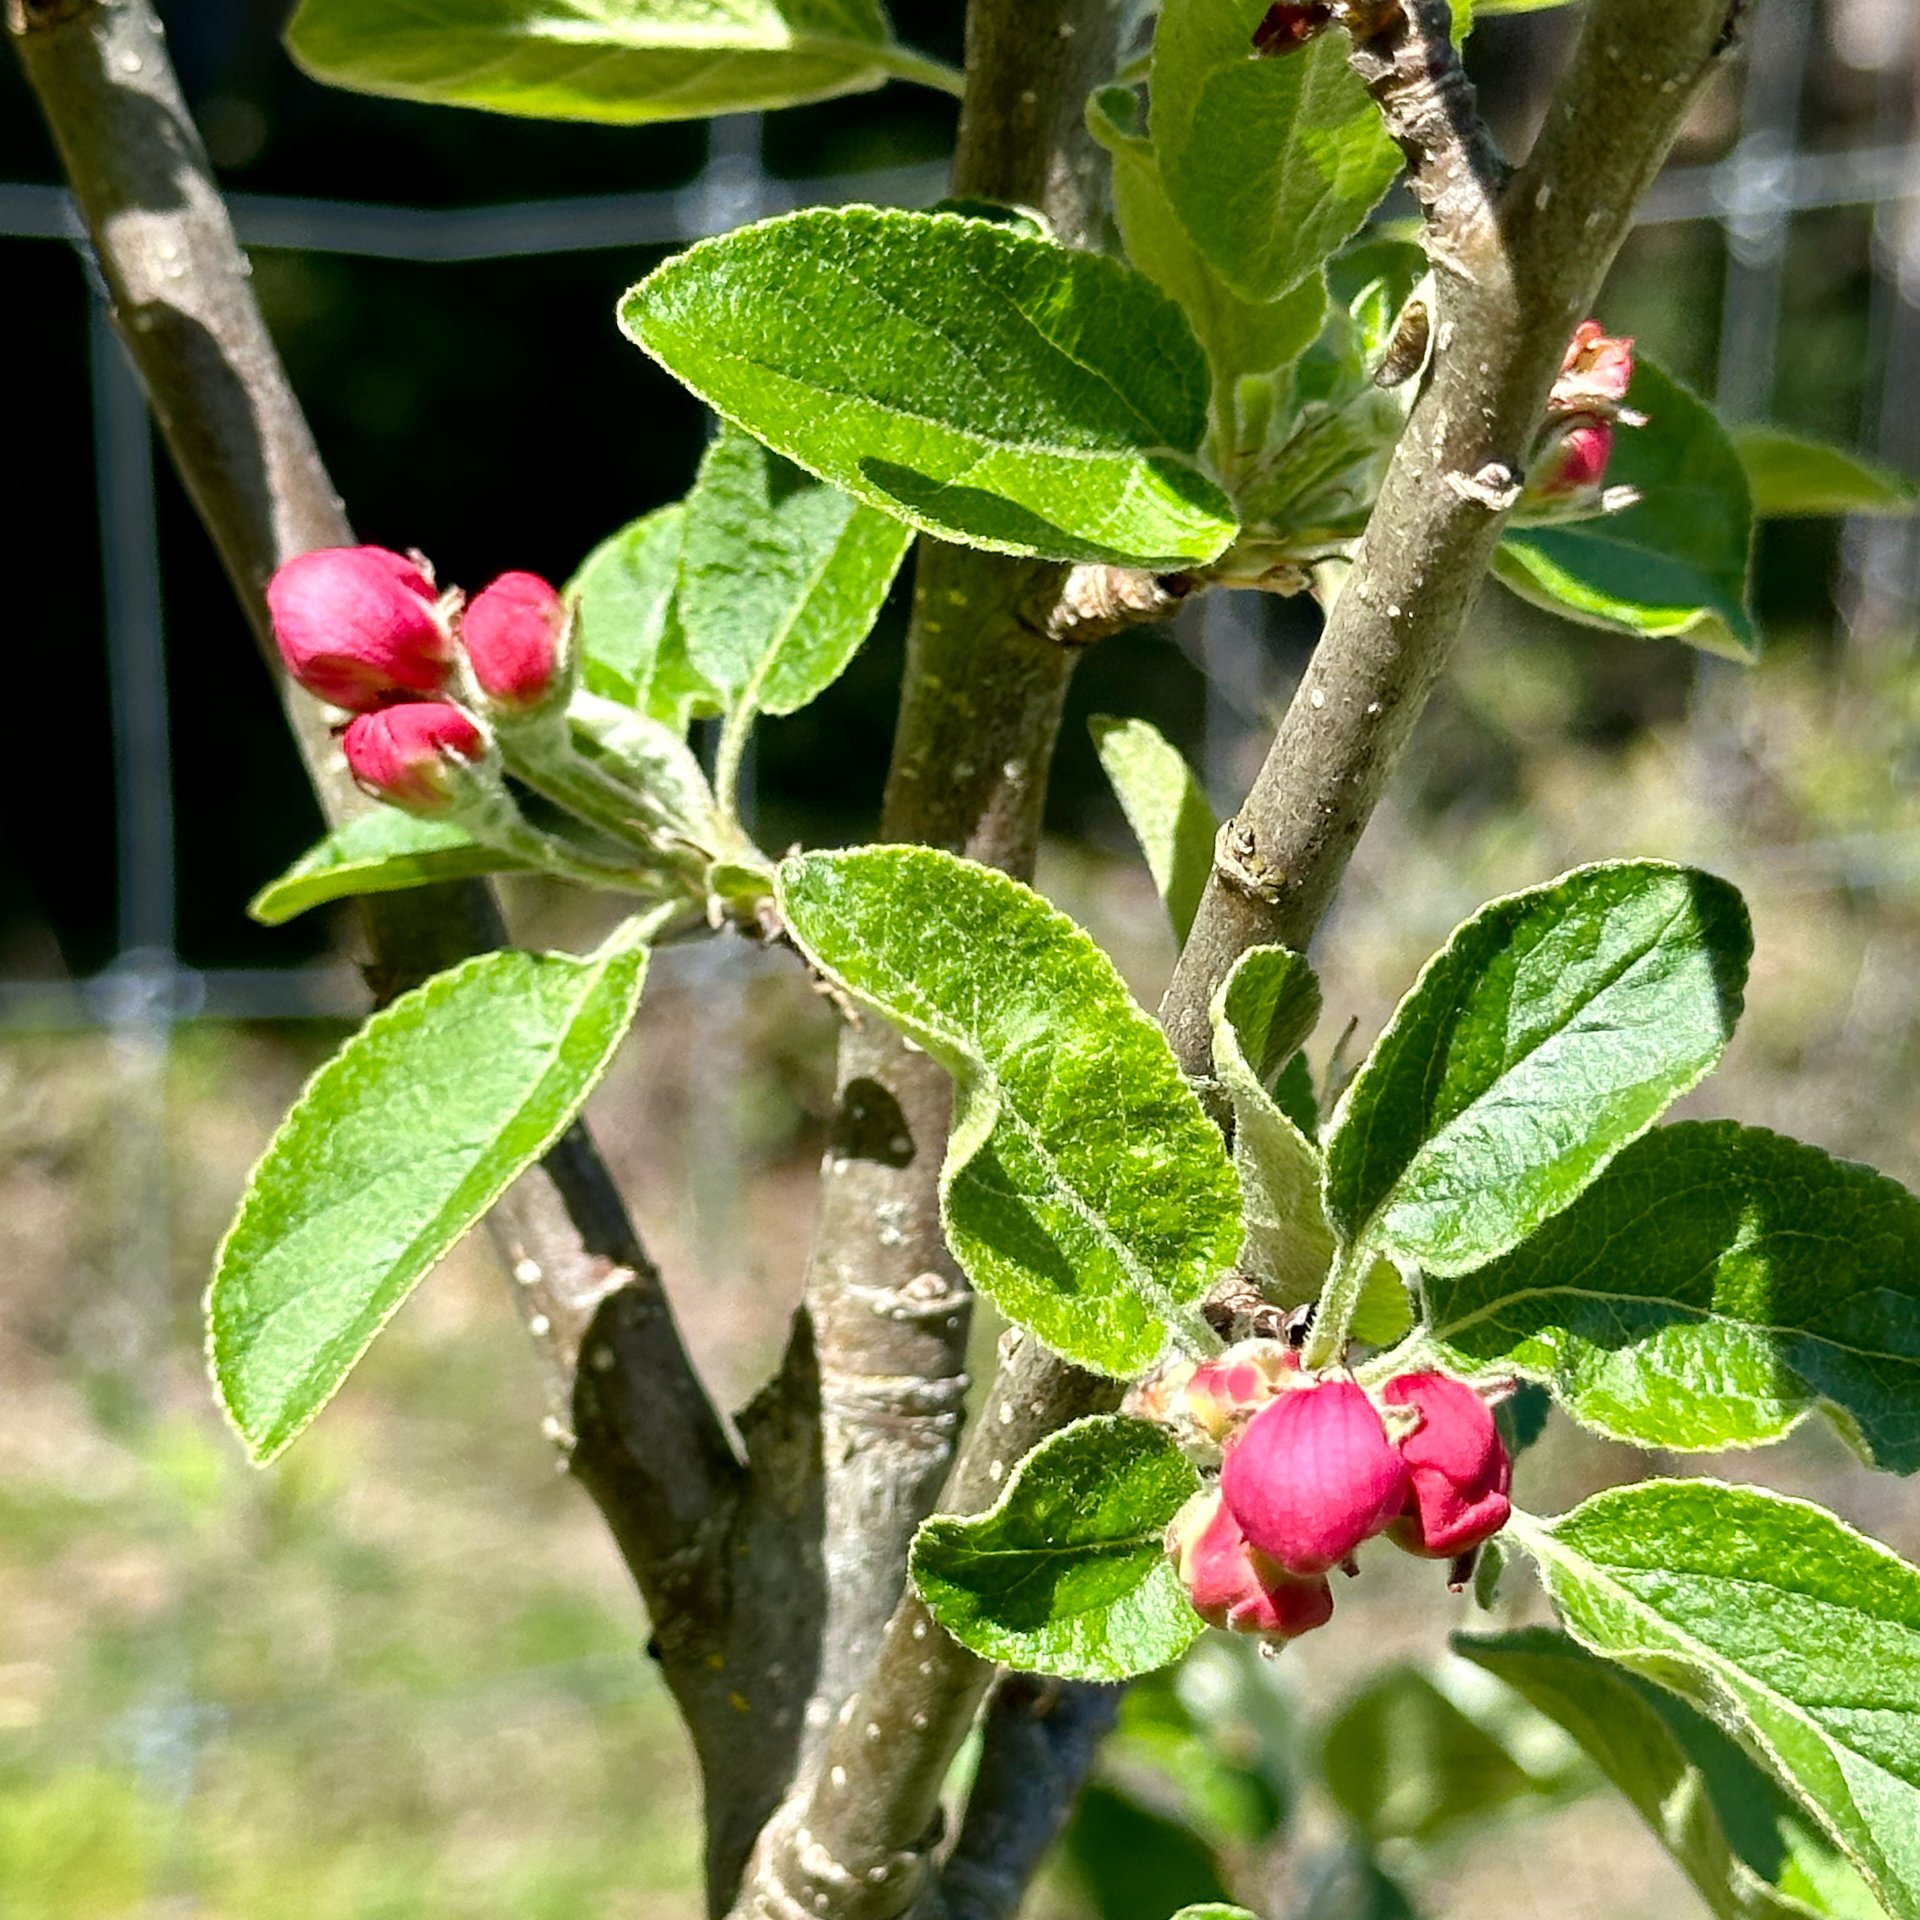  There are a ton of blossom about to burst out on the apple trees.  